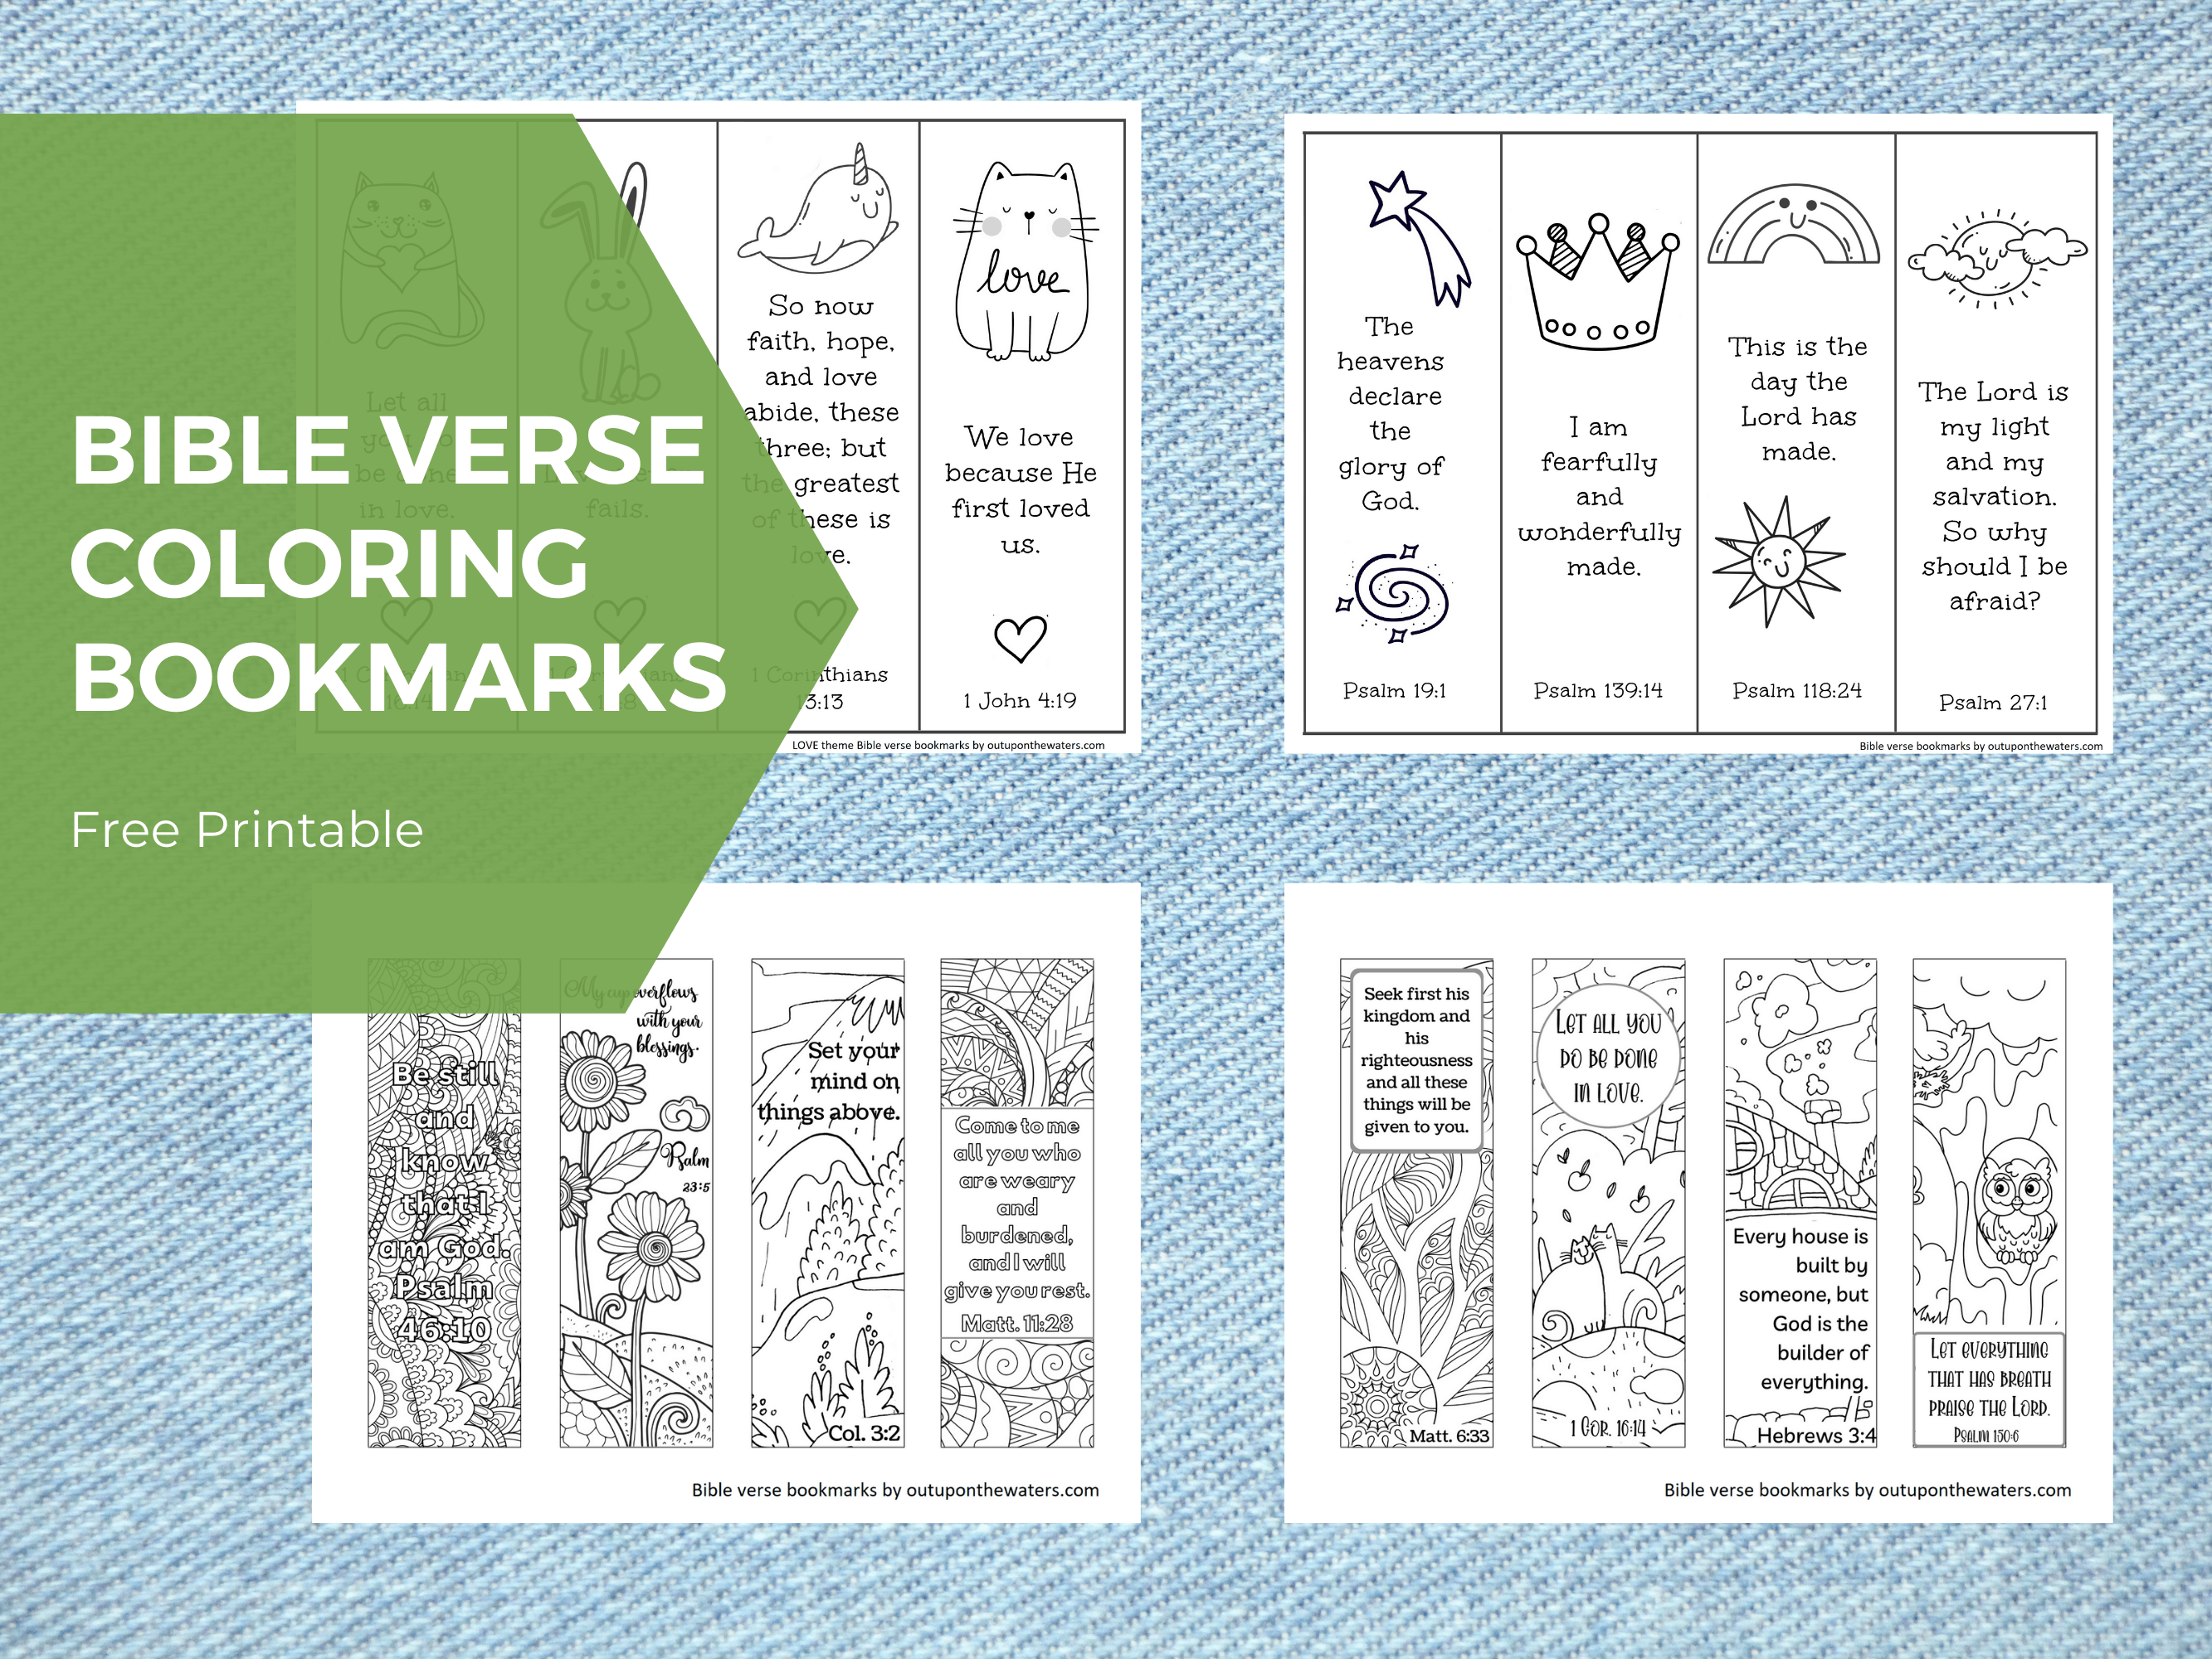 free-printable-bible-verse-bookmarks-to-color-out-upon-the-waters